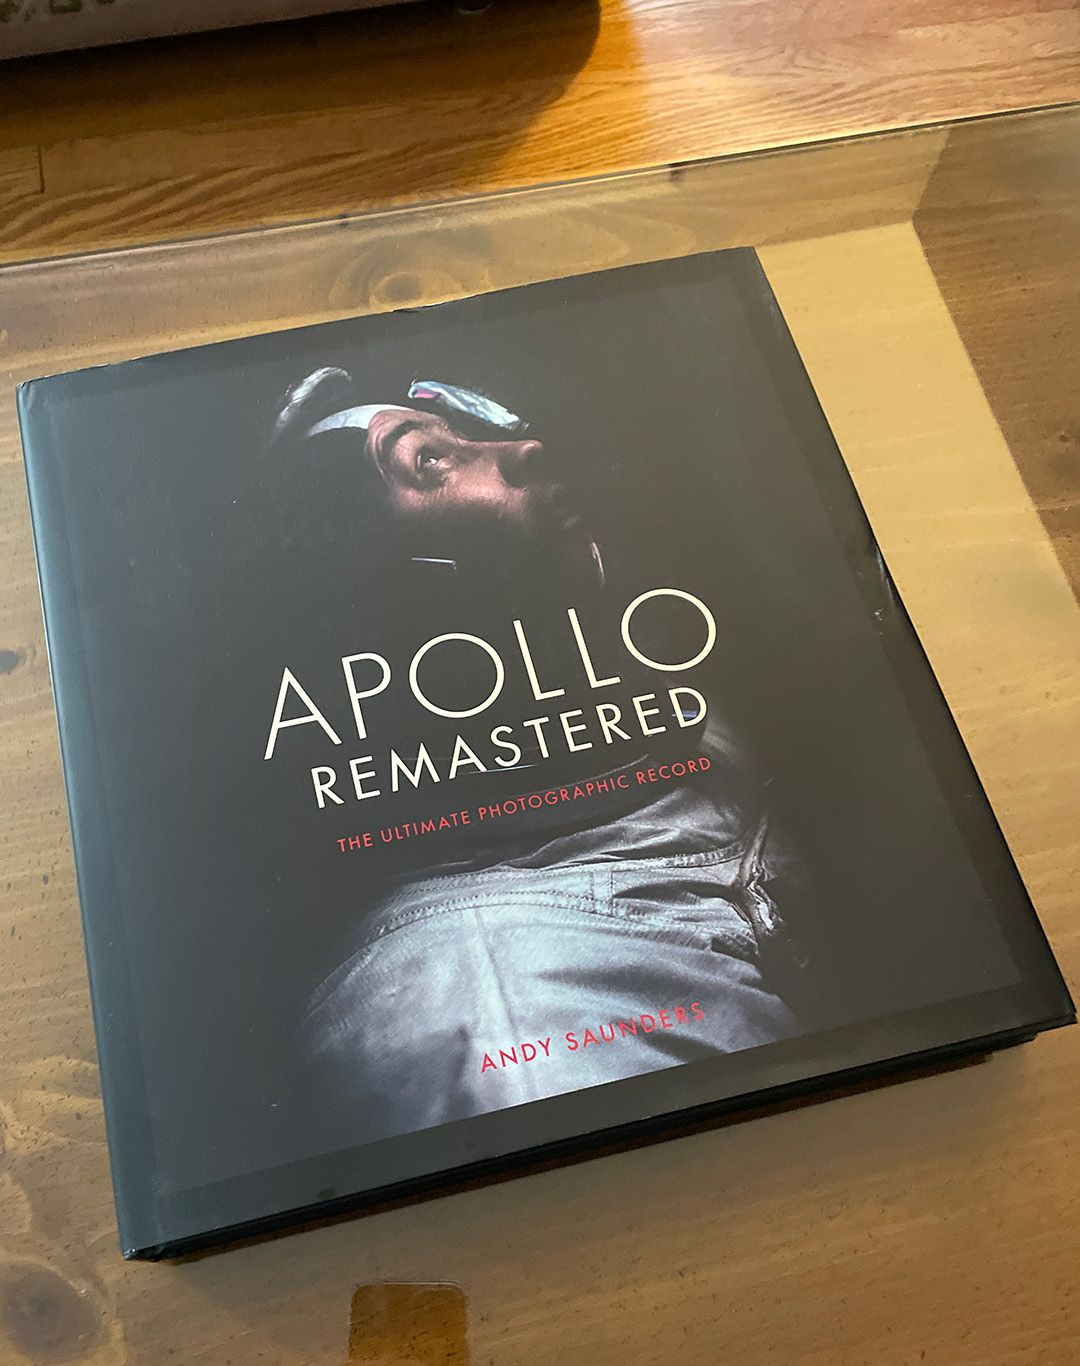 A view of the cover of Andy Saunder's book Apollo Remastered